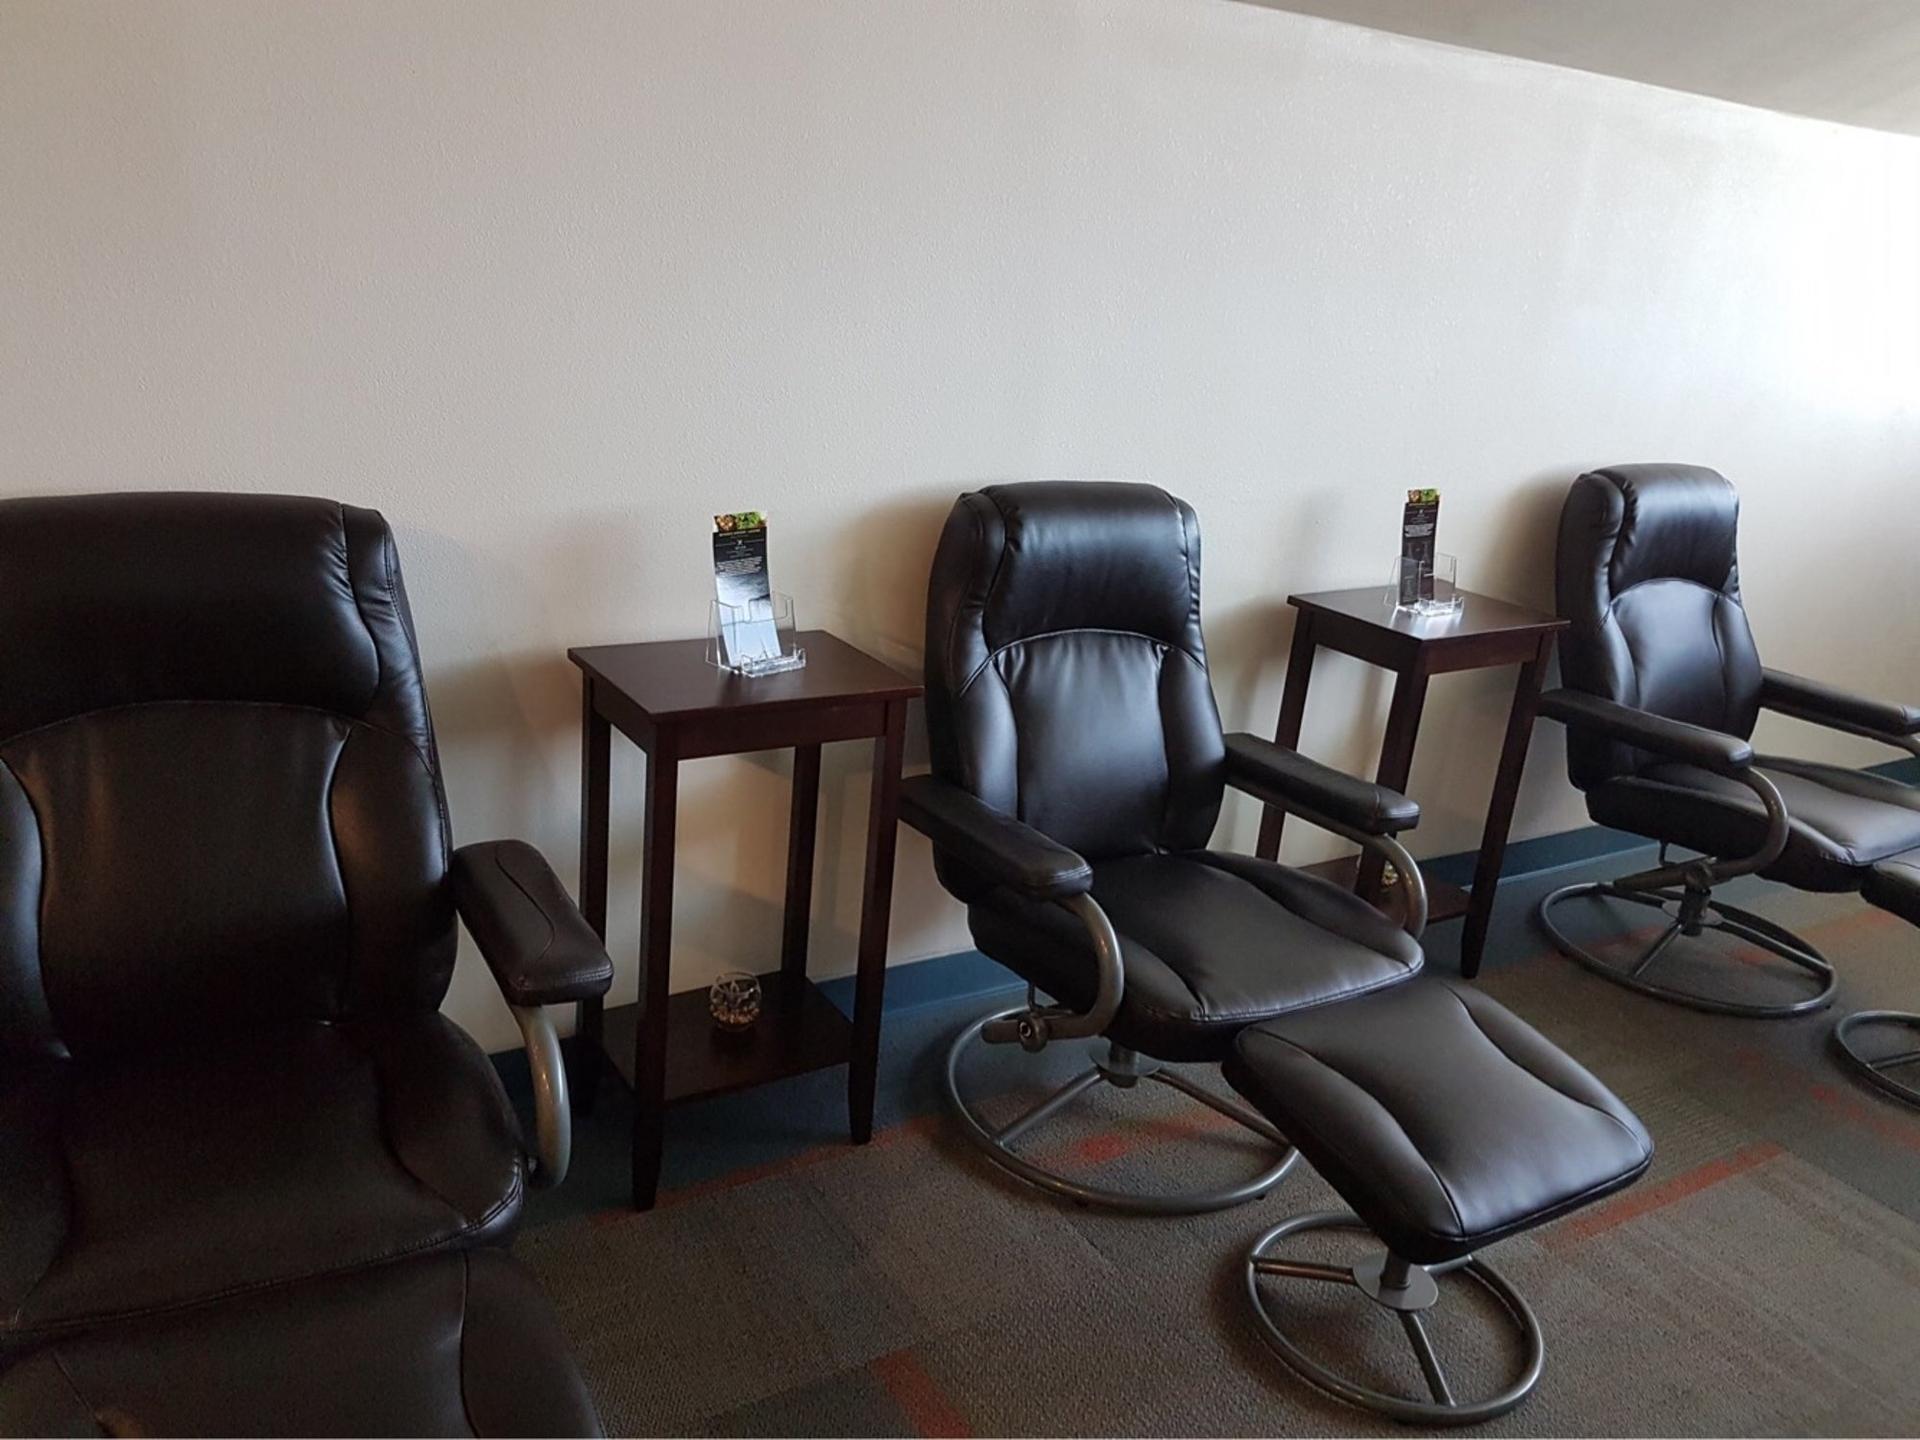 Skyview Airport Lounge image 3 of 6